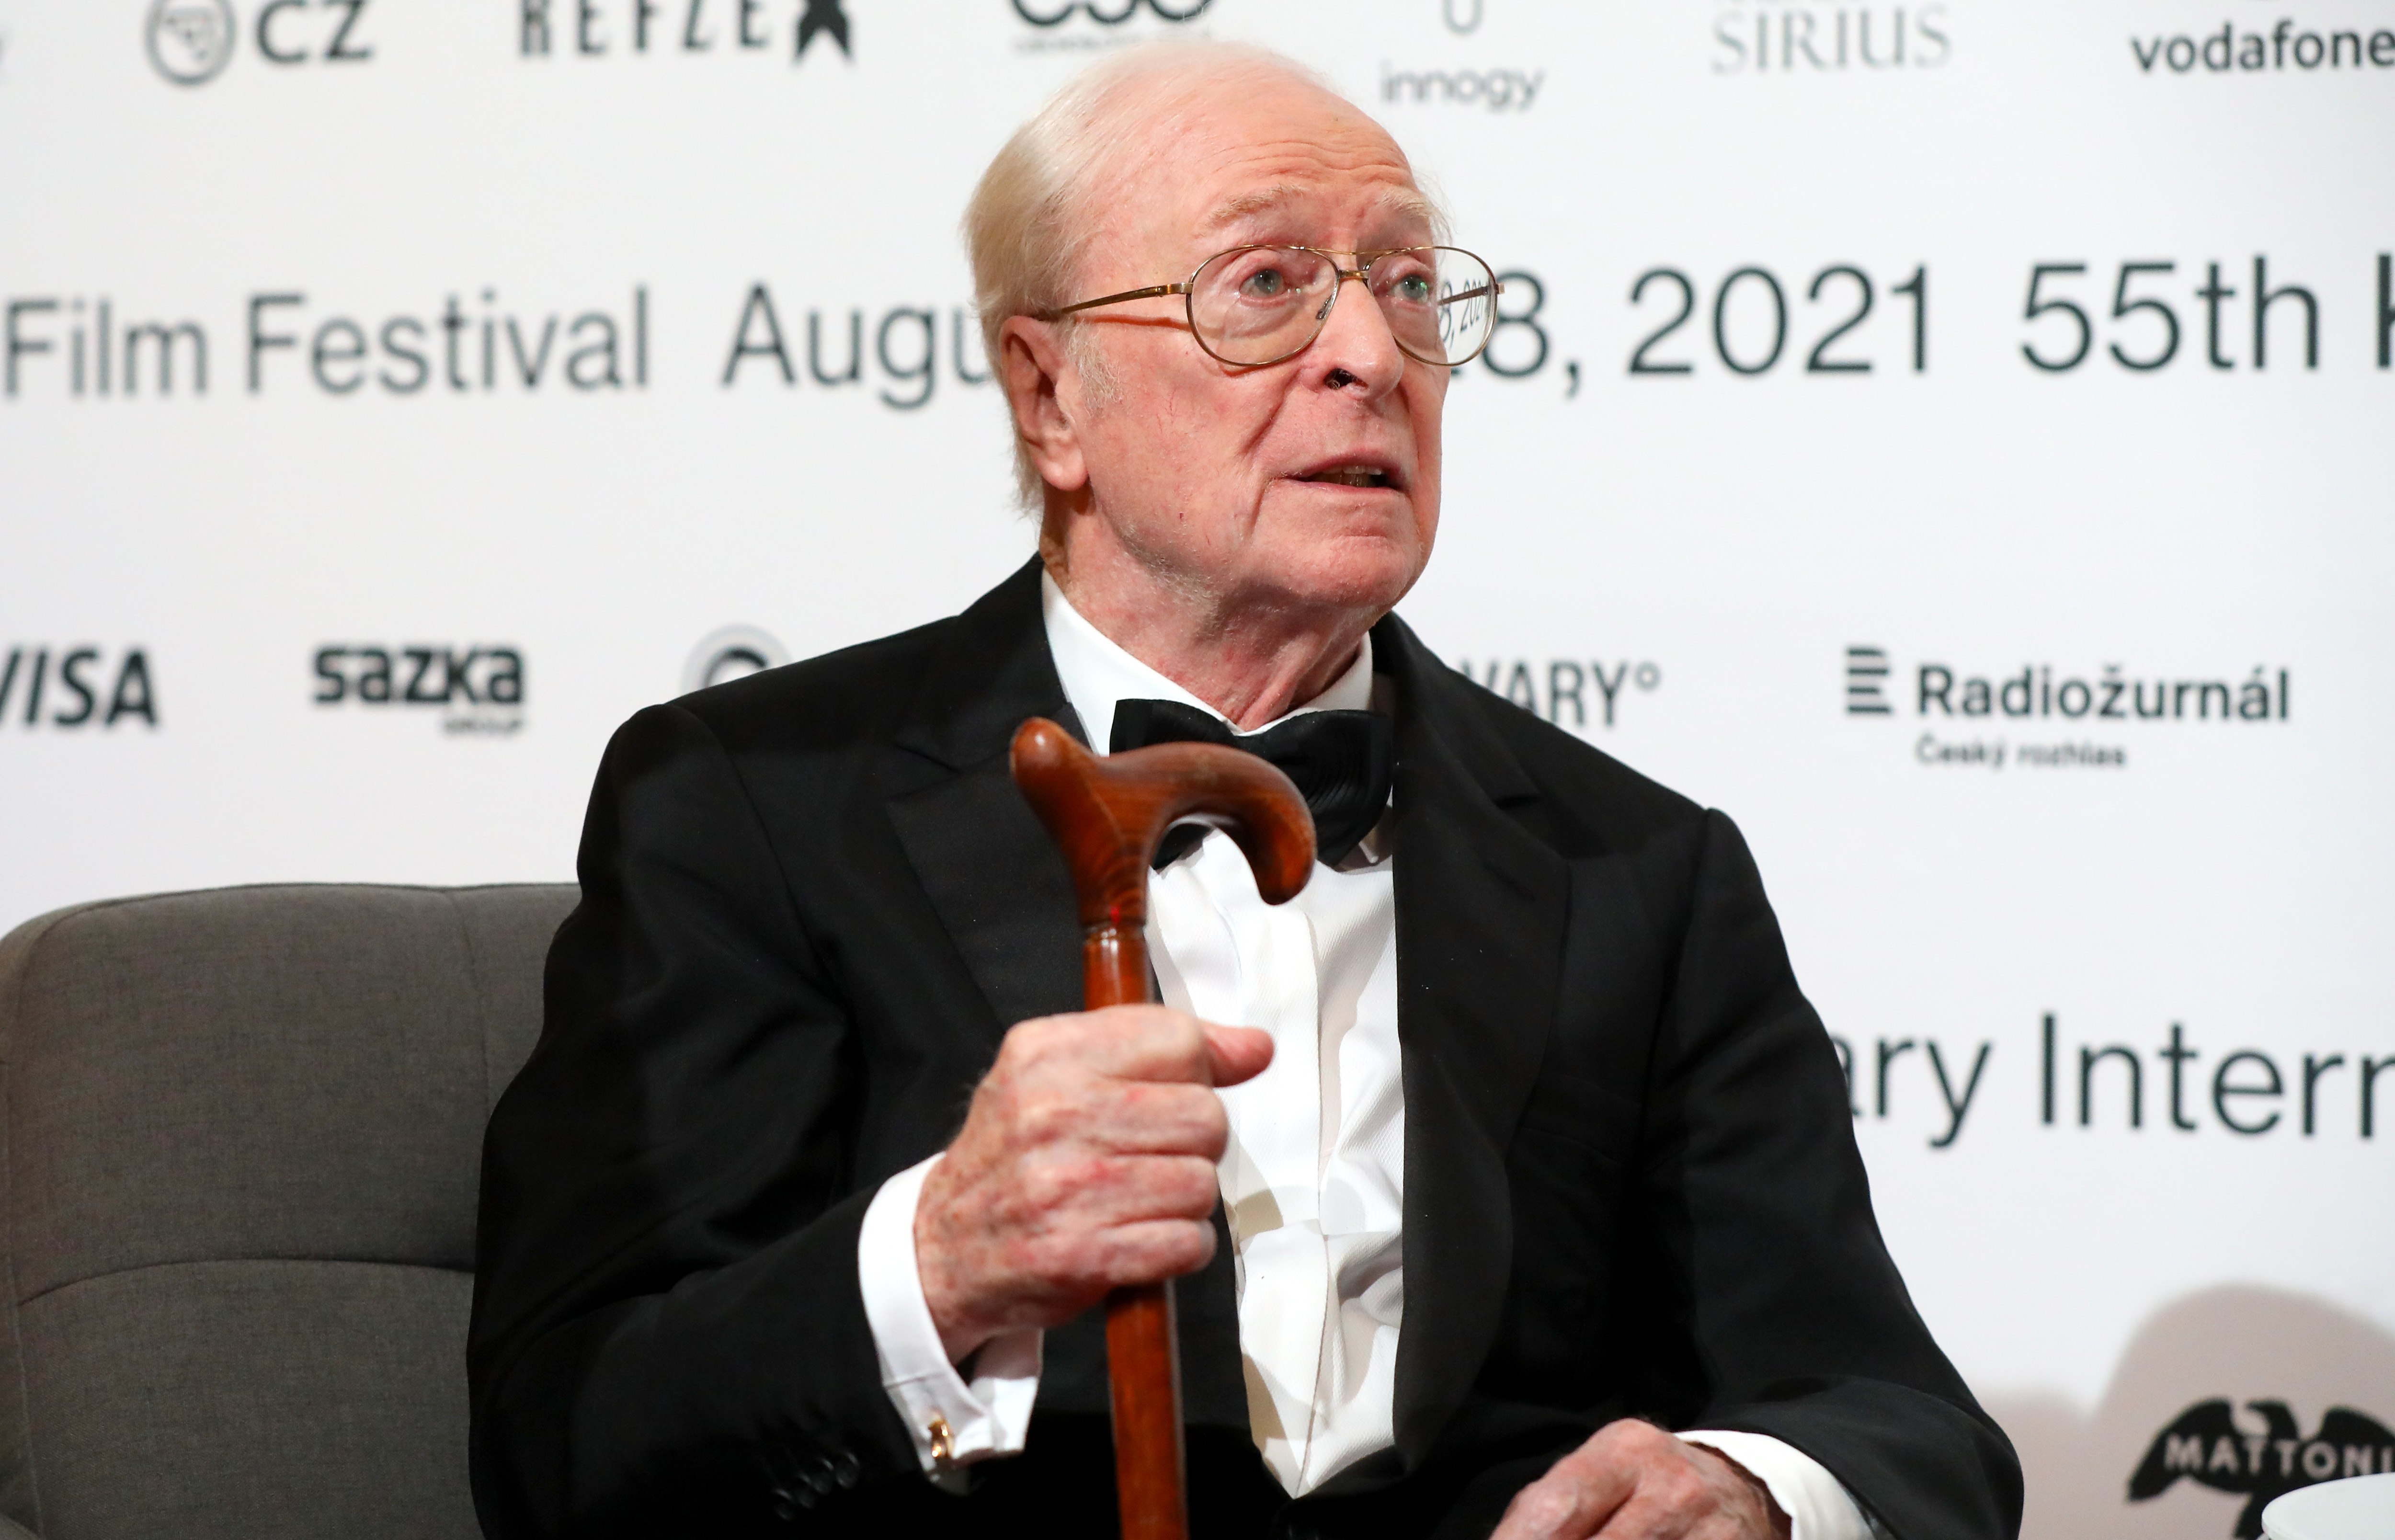 Michael Caine attends the 55th Karlovy Vary International Film Festival on August 20, 2021 in Karlovy Vary, Czech Republic. | Source: Getty Images